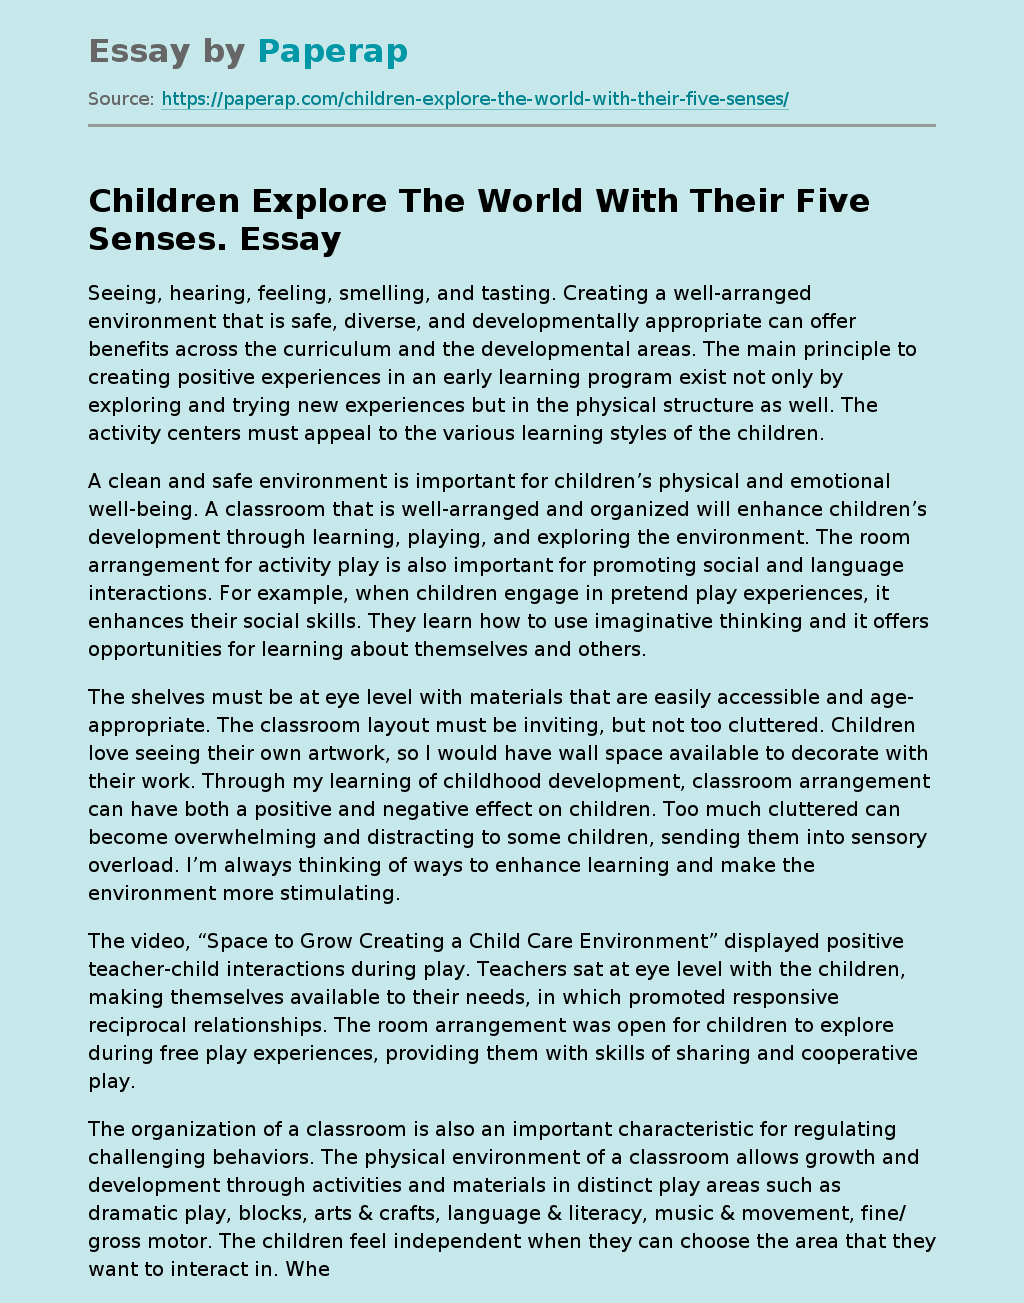 Children Explore The World With Their Five Senses.